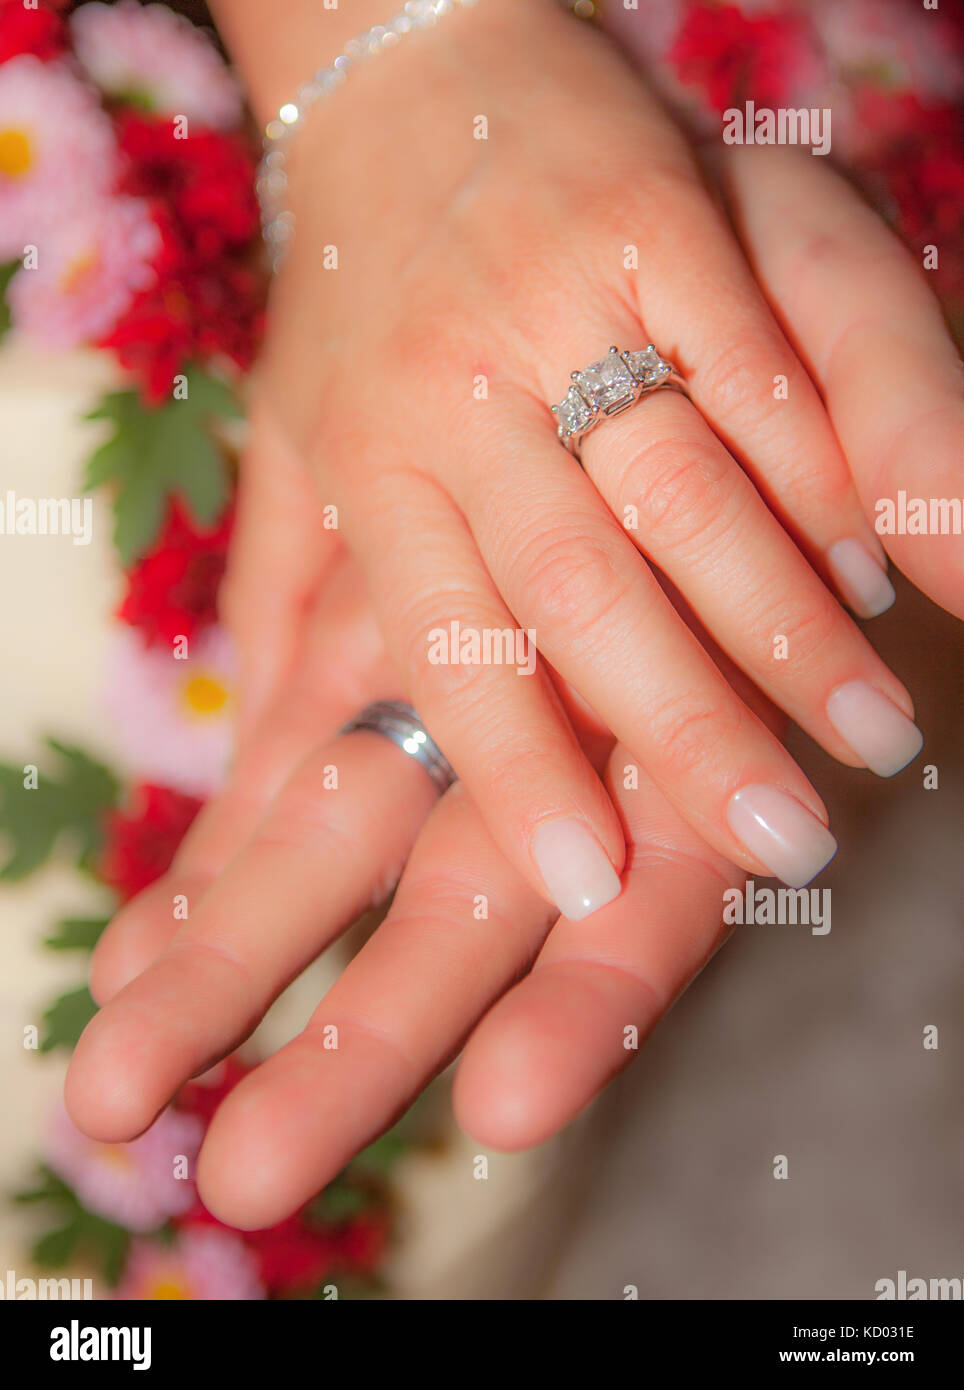 Closeup of newlywed couple's hands featuring wedding rings. Soft focus. Stock Photo